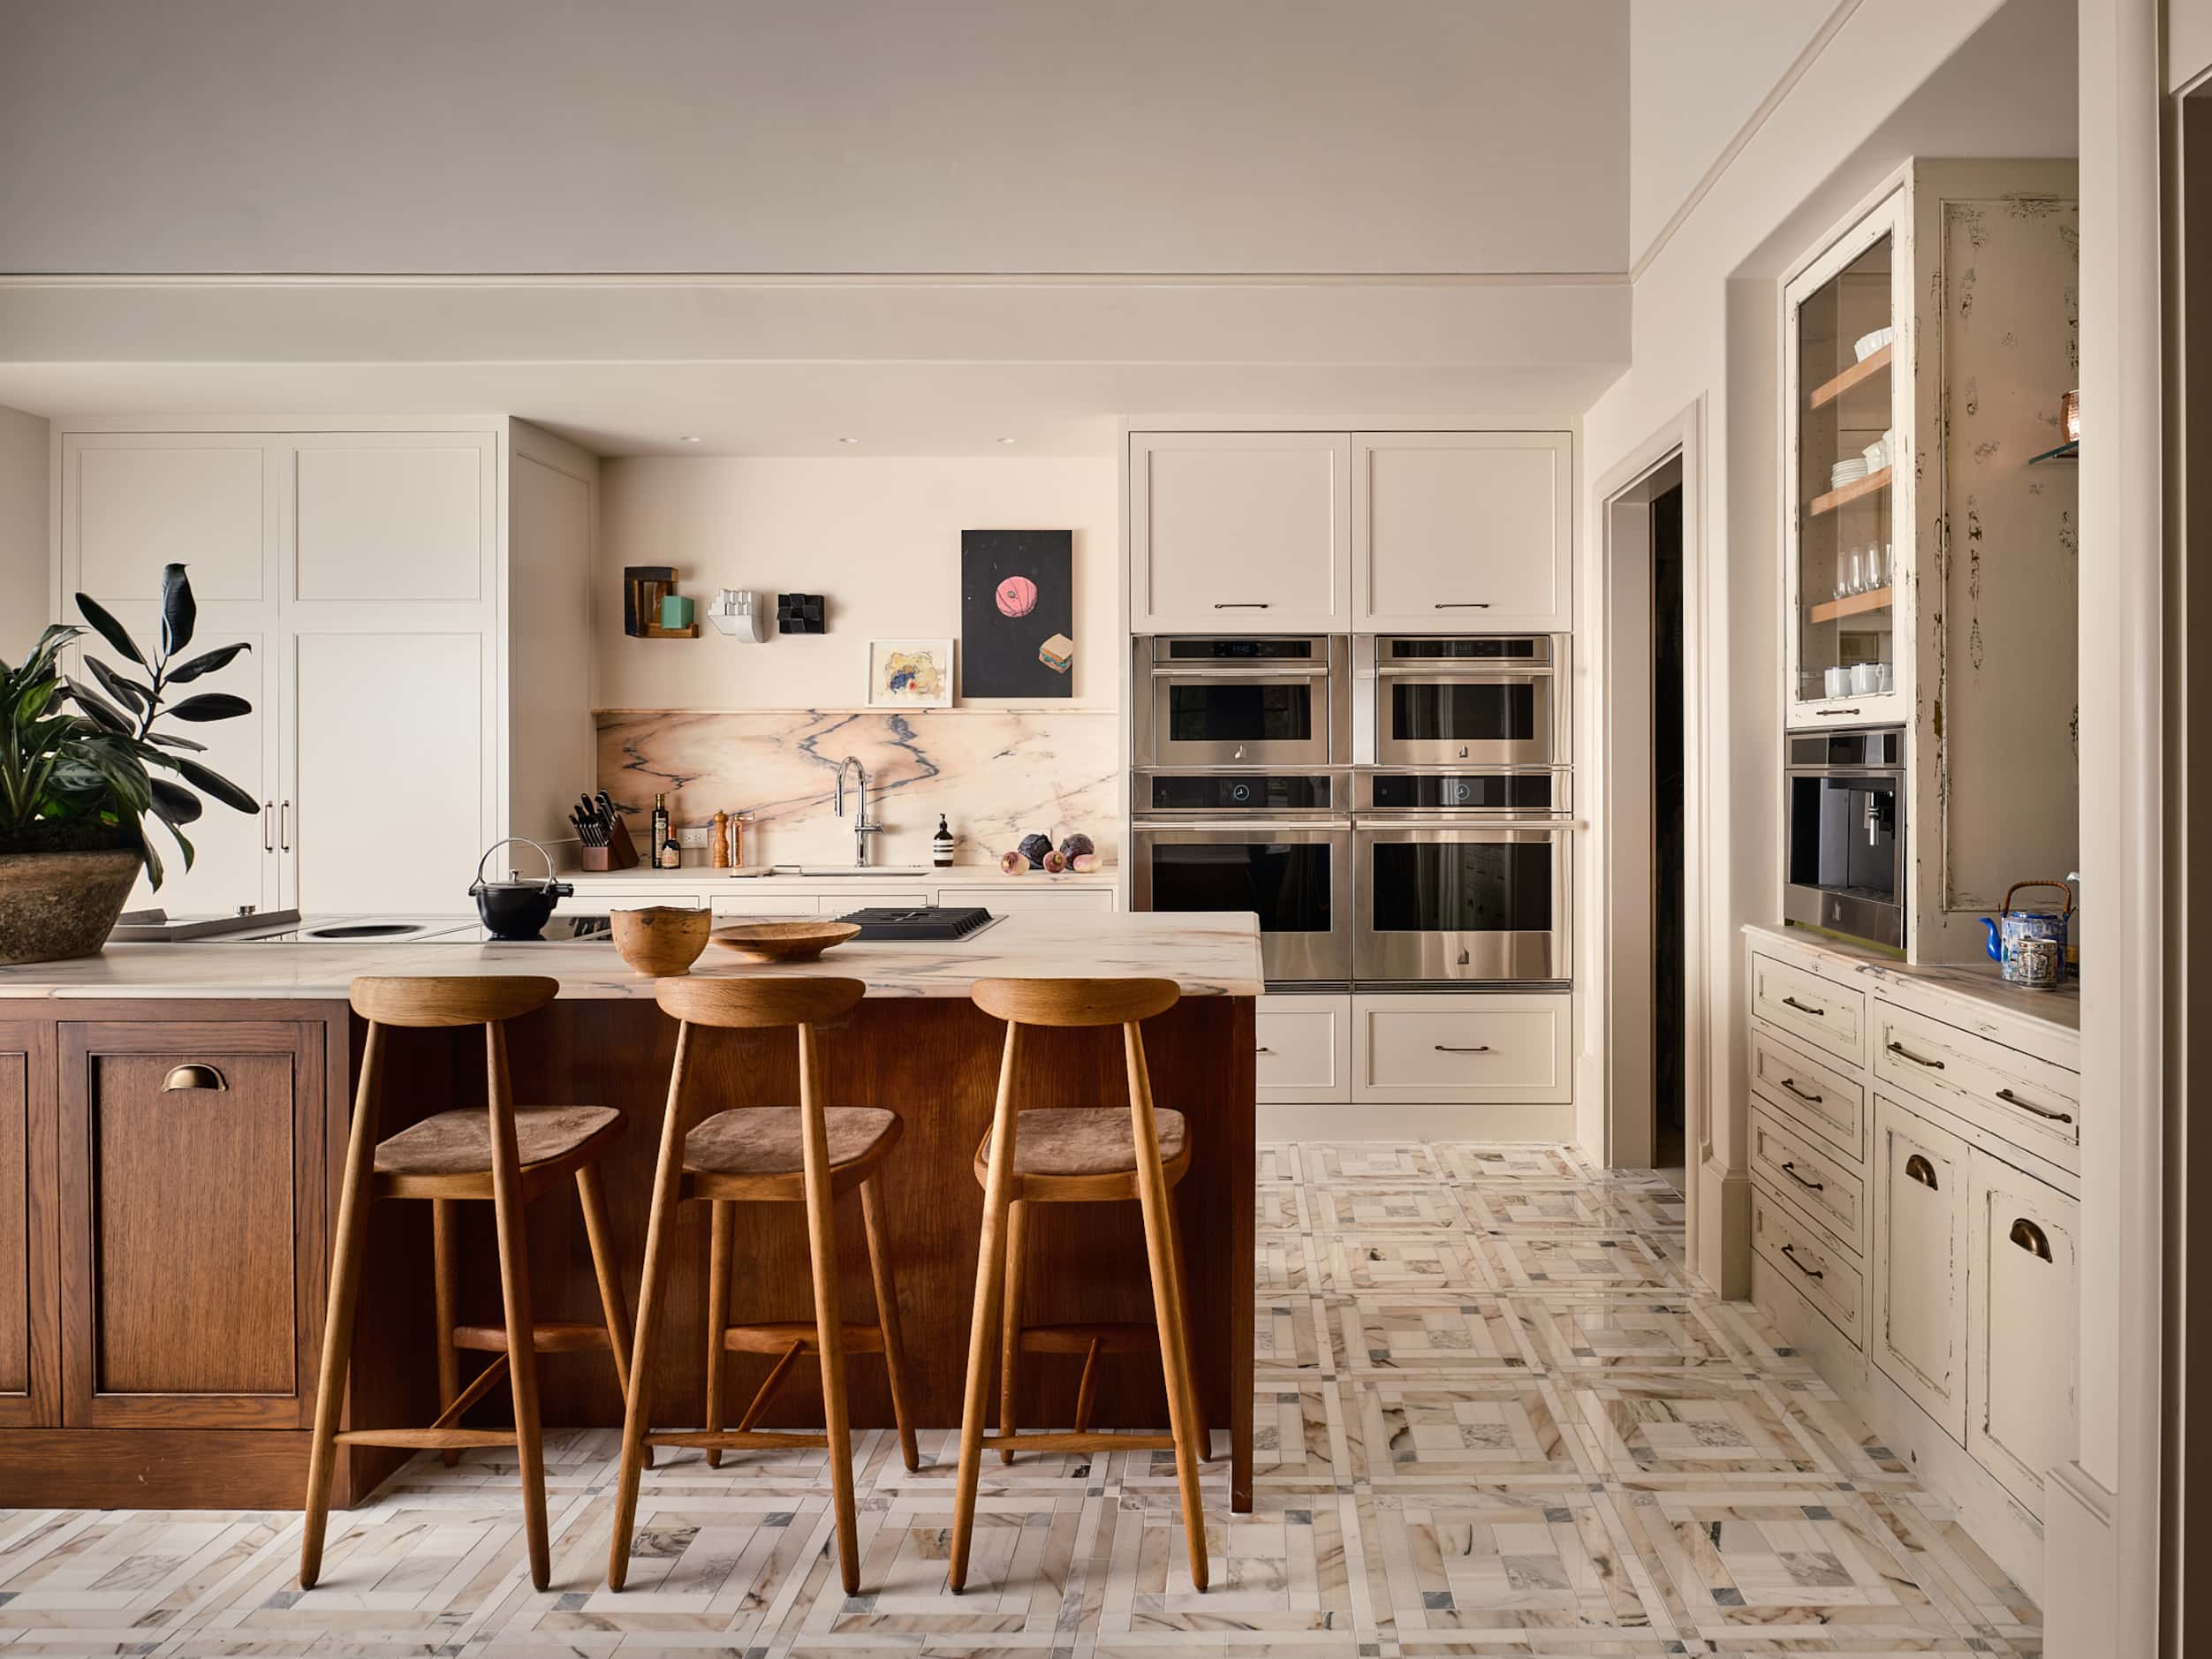 In the show house’s Old European-inspired kitchen designed by Kurt Bielawski of More Design...